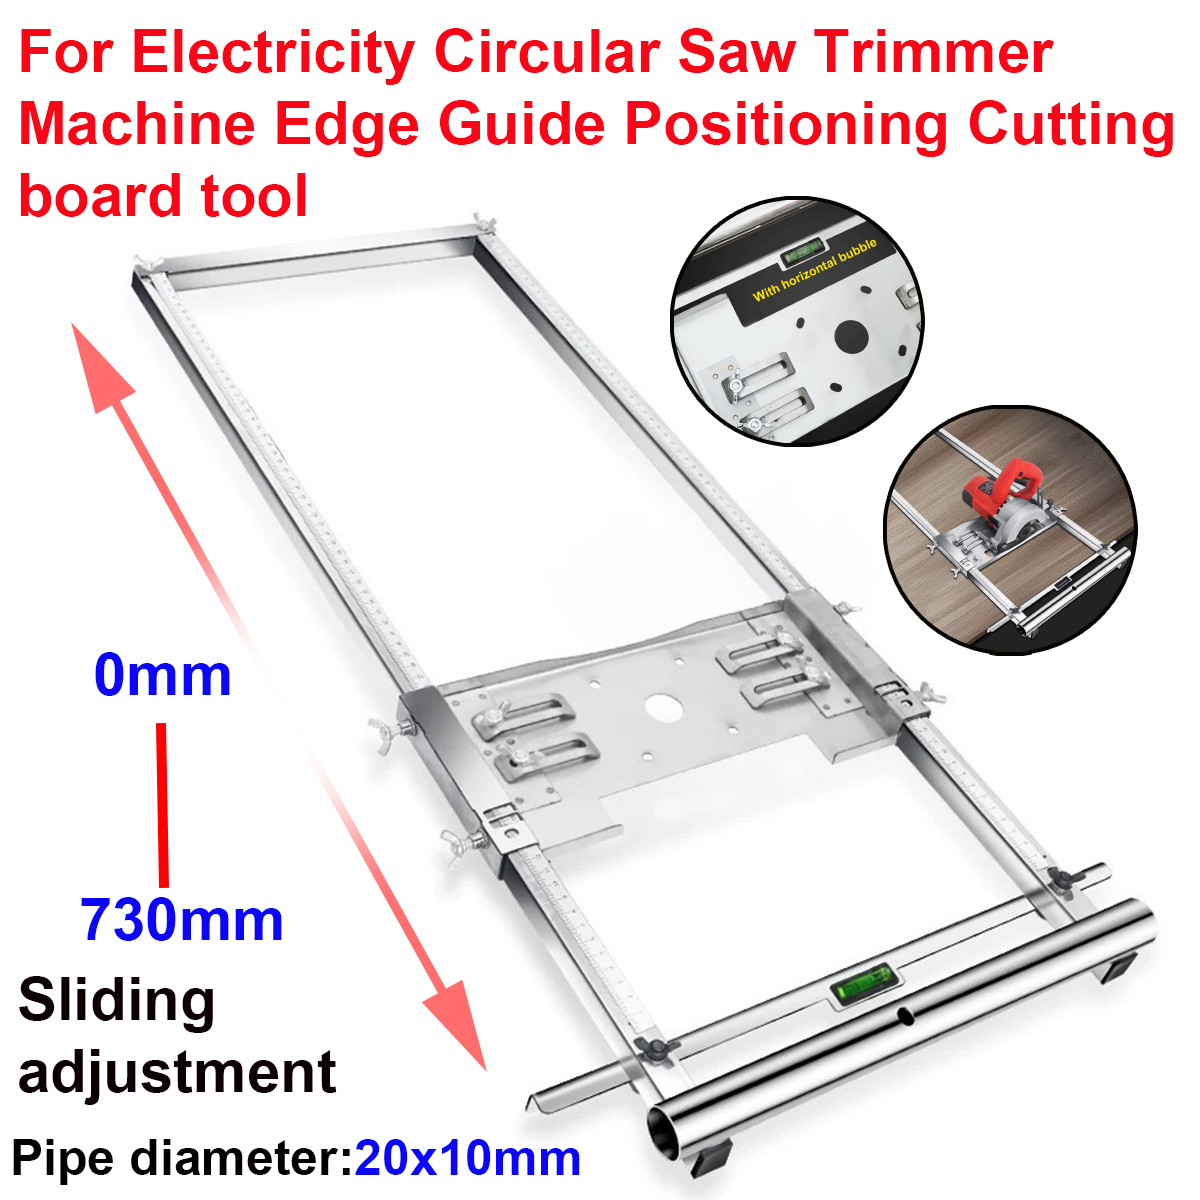 Woodworking-trimmer-positioning-frame-For-Electricity-Circular-Saw-Trimmer-Machine-Edge-Guide-Positi-1764724-2